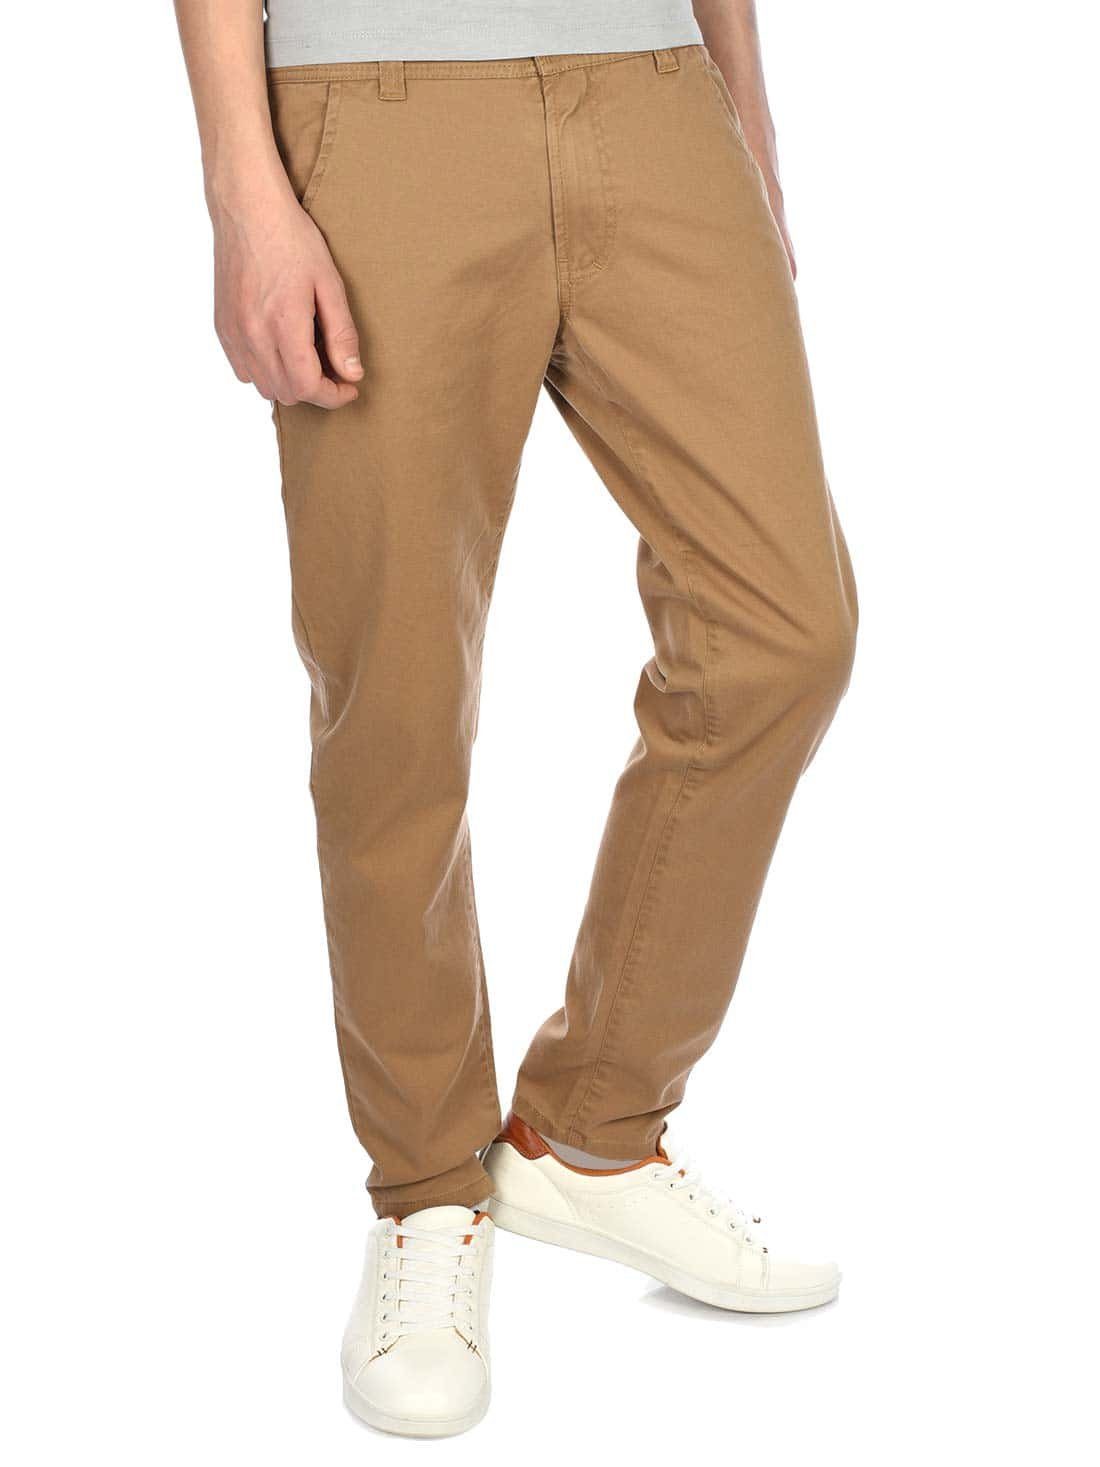 Jungen casual Chino Hose Chinohose (1-tlg) Beige BEZLIT